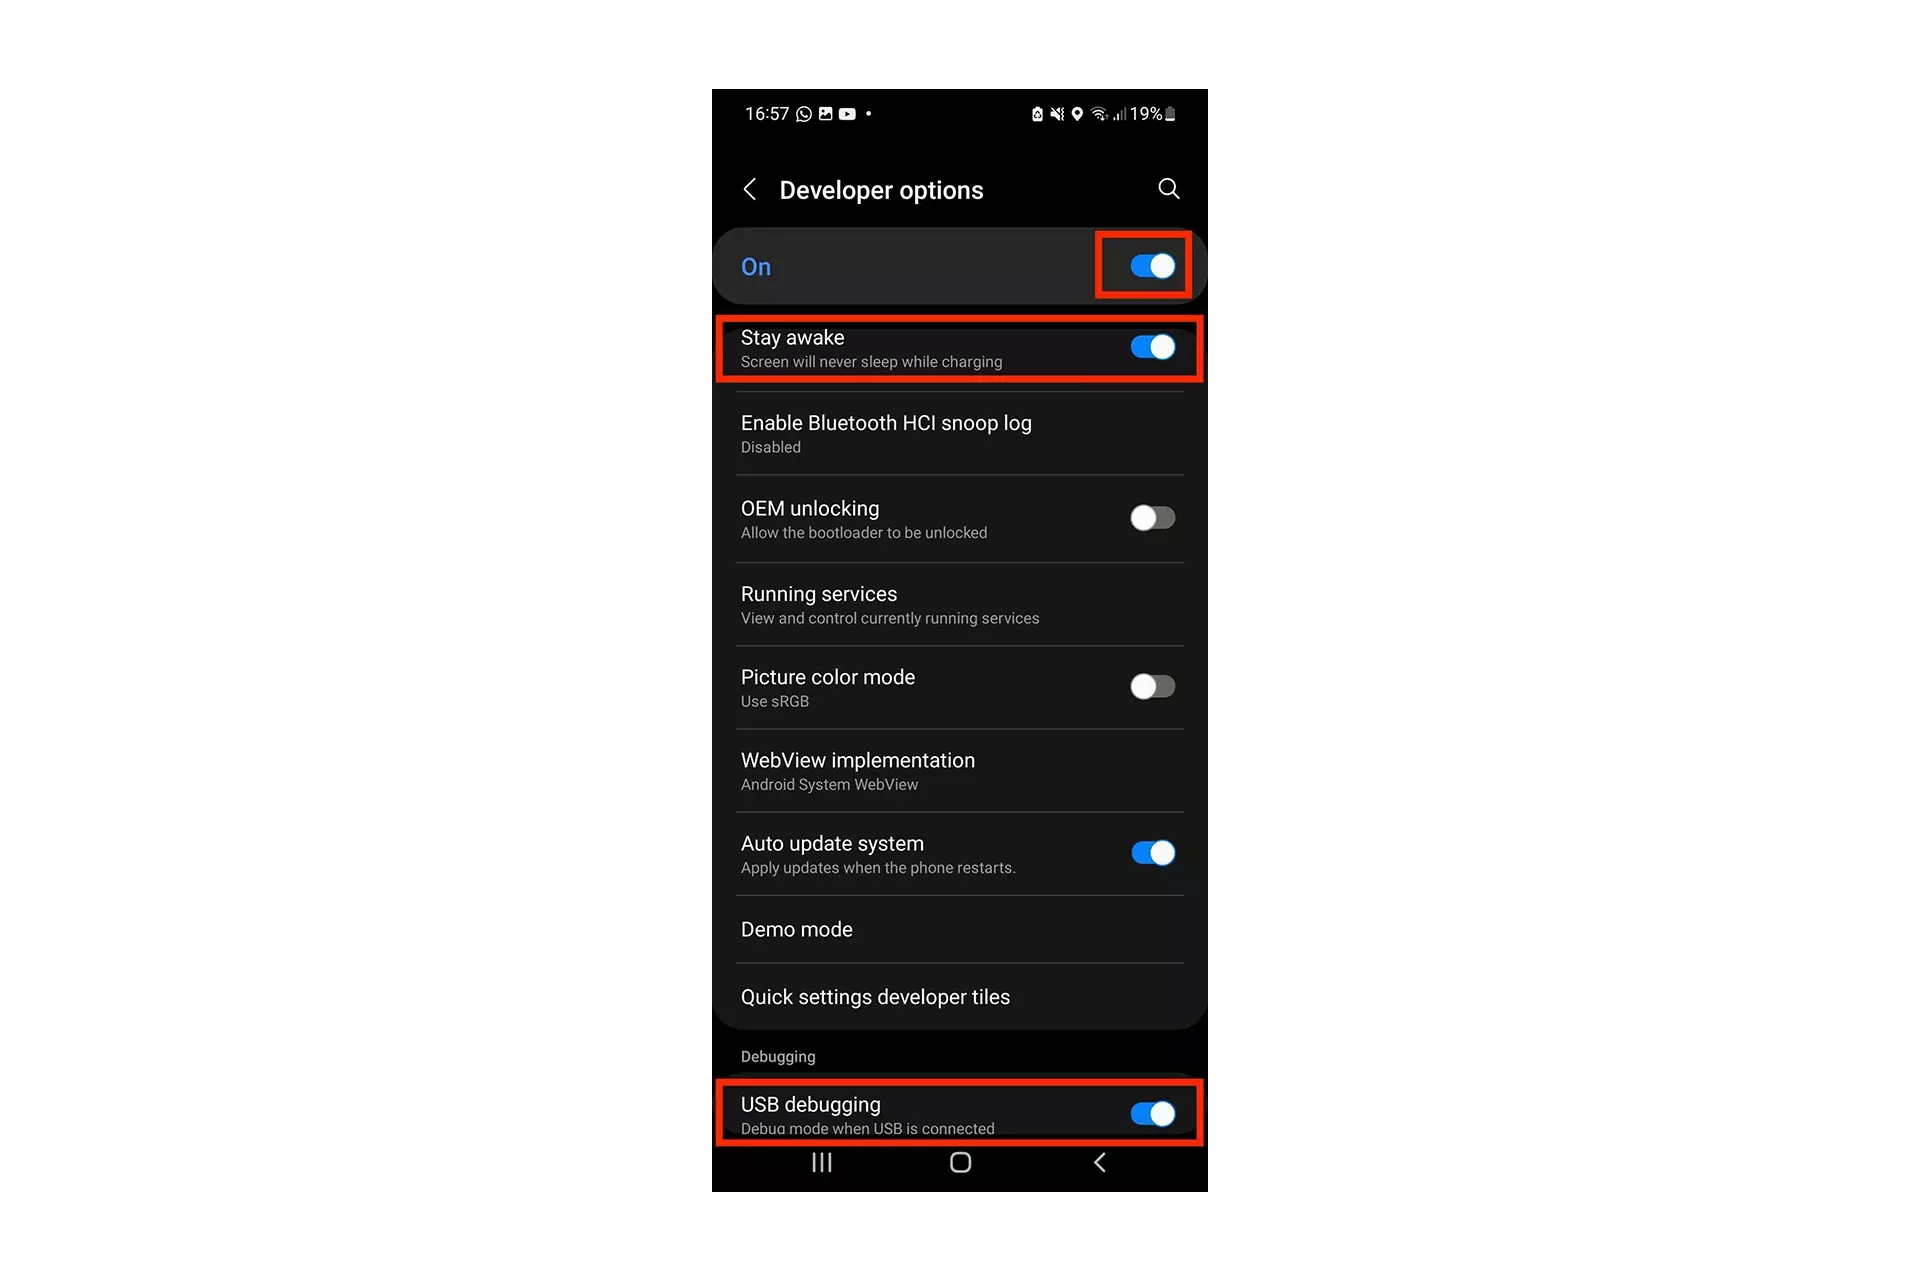 A screenshot of an Android on the Developer Options screen showing our recommended settings. The highlighted items are: Developer Mode ON, USB Debugging ON and Stay Awake ON.